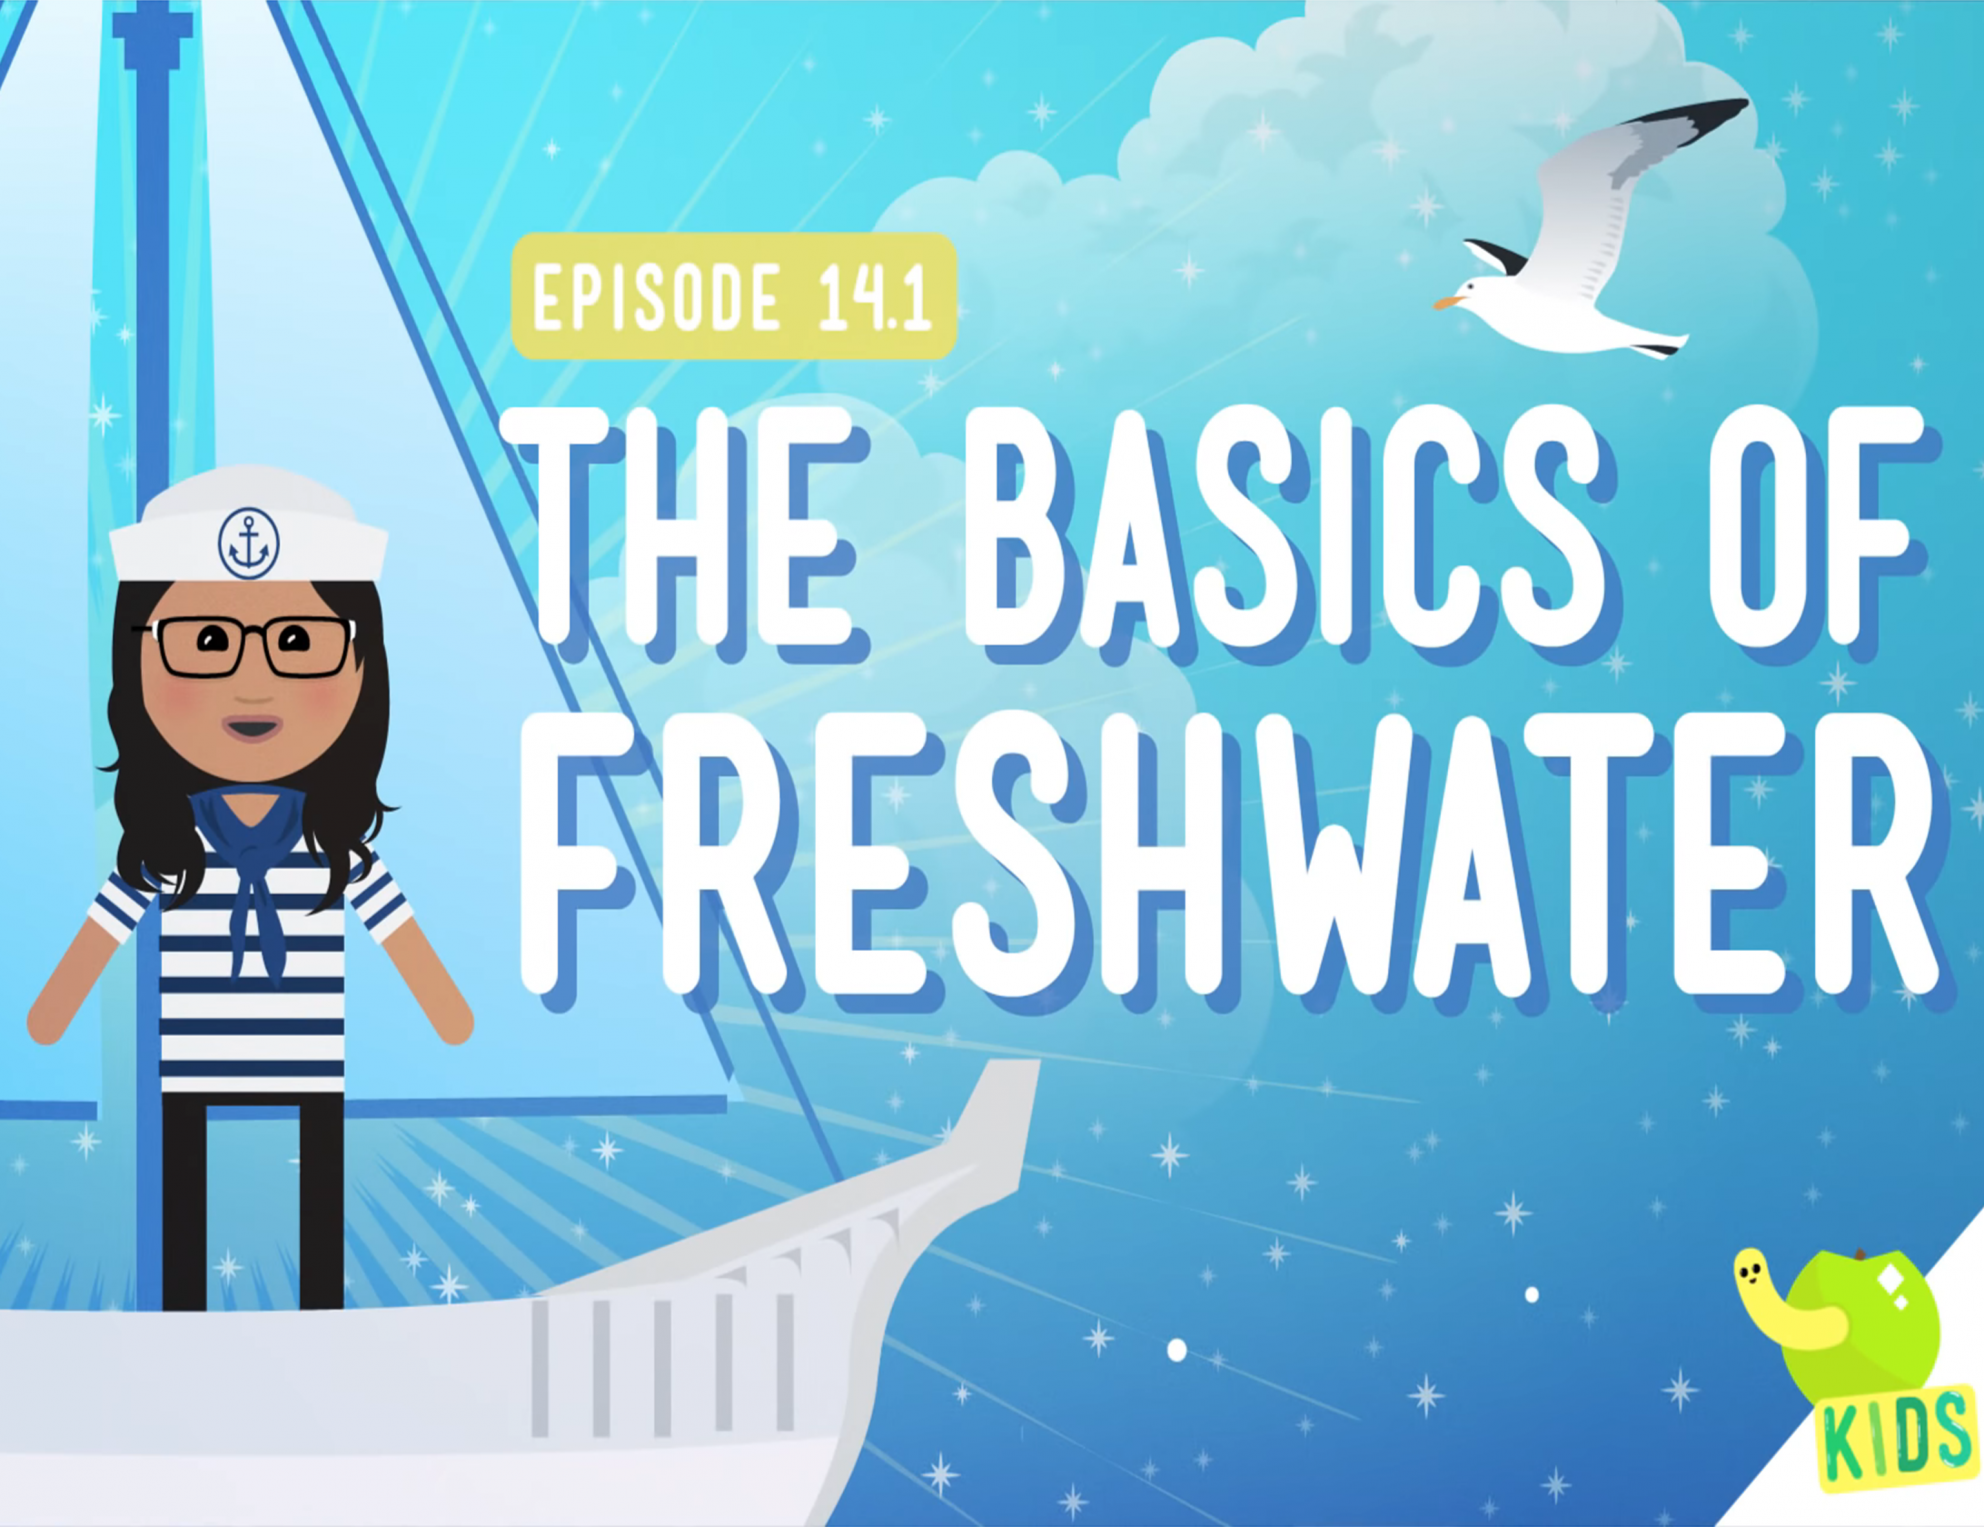 The basics of freshwater video cover